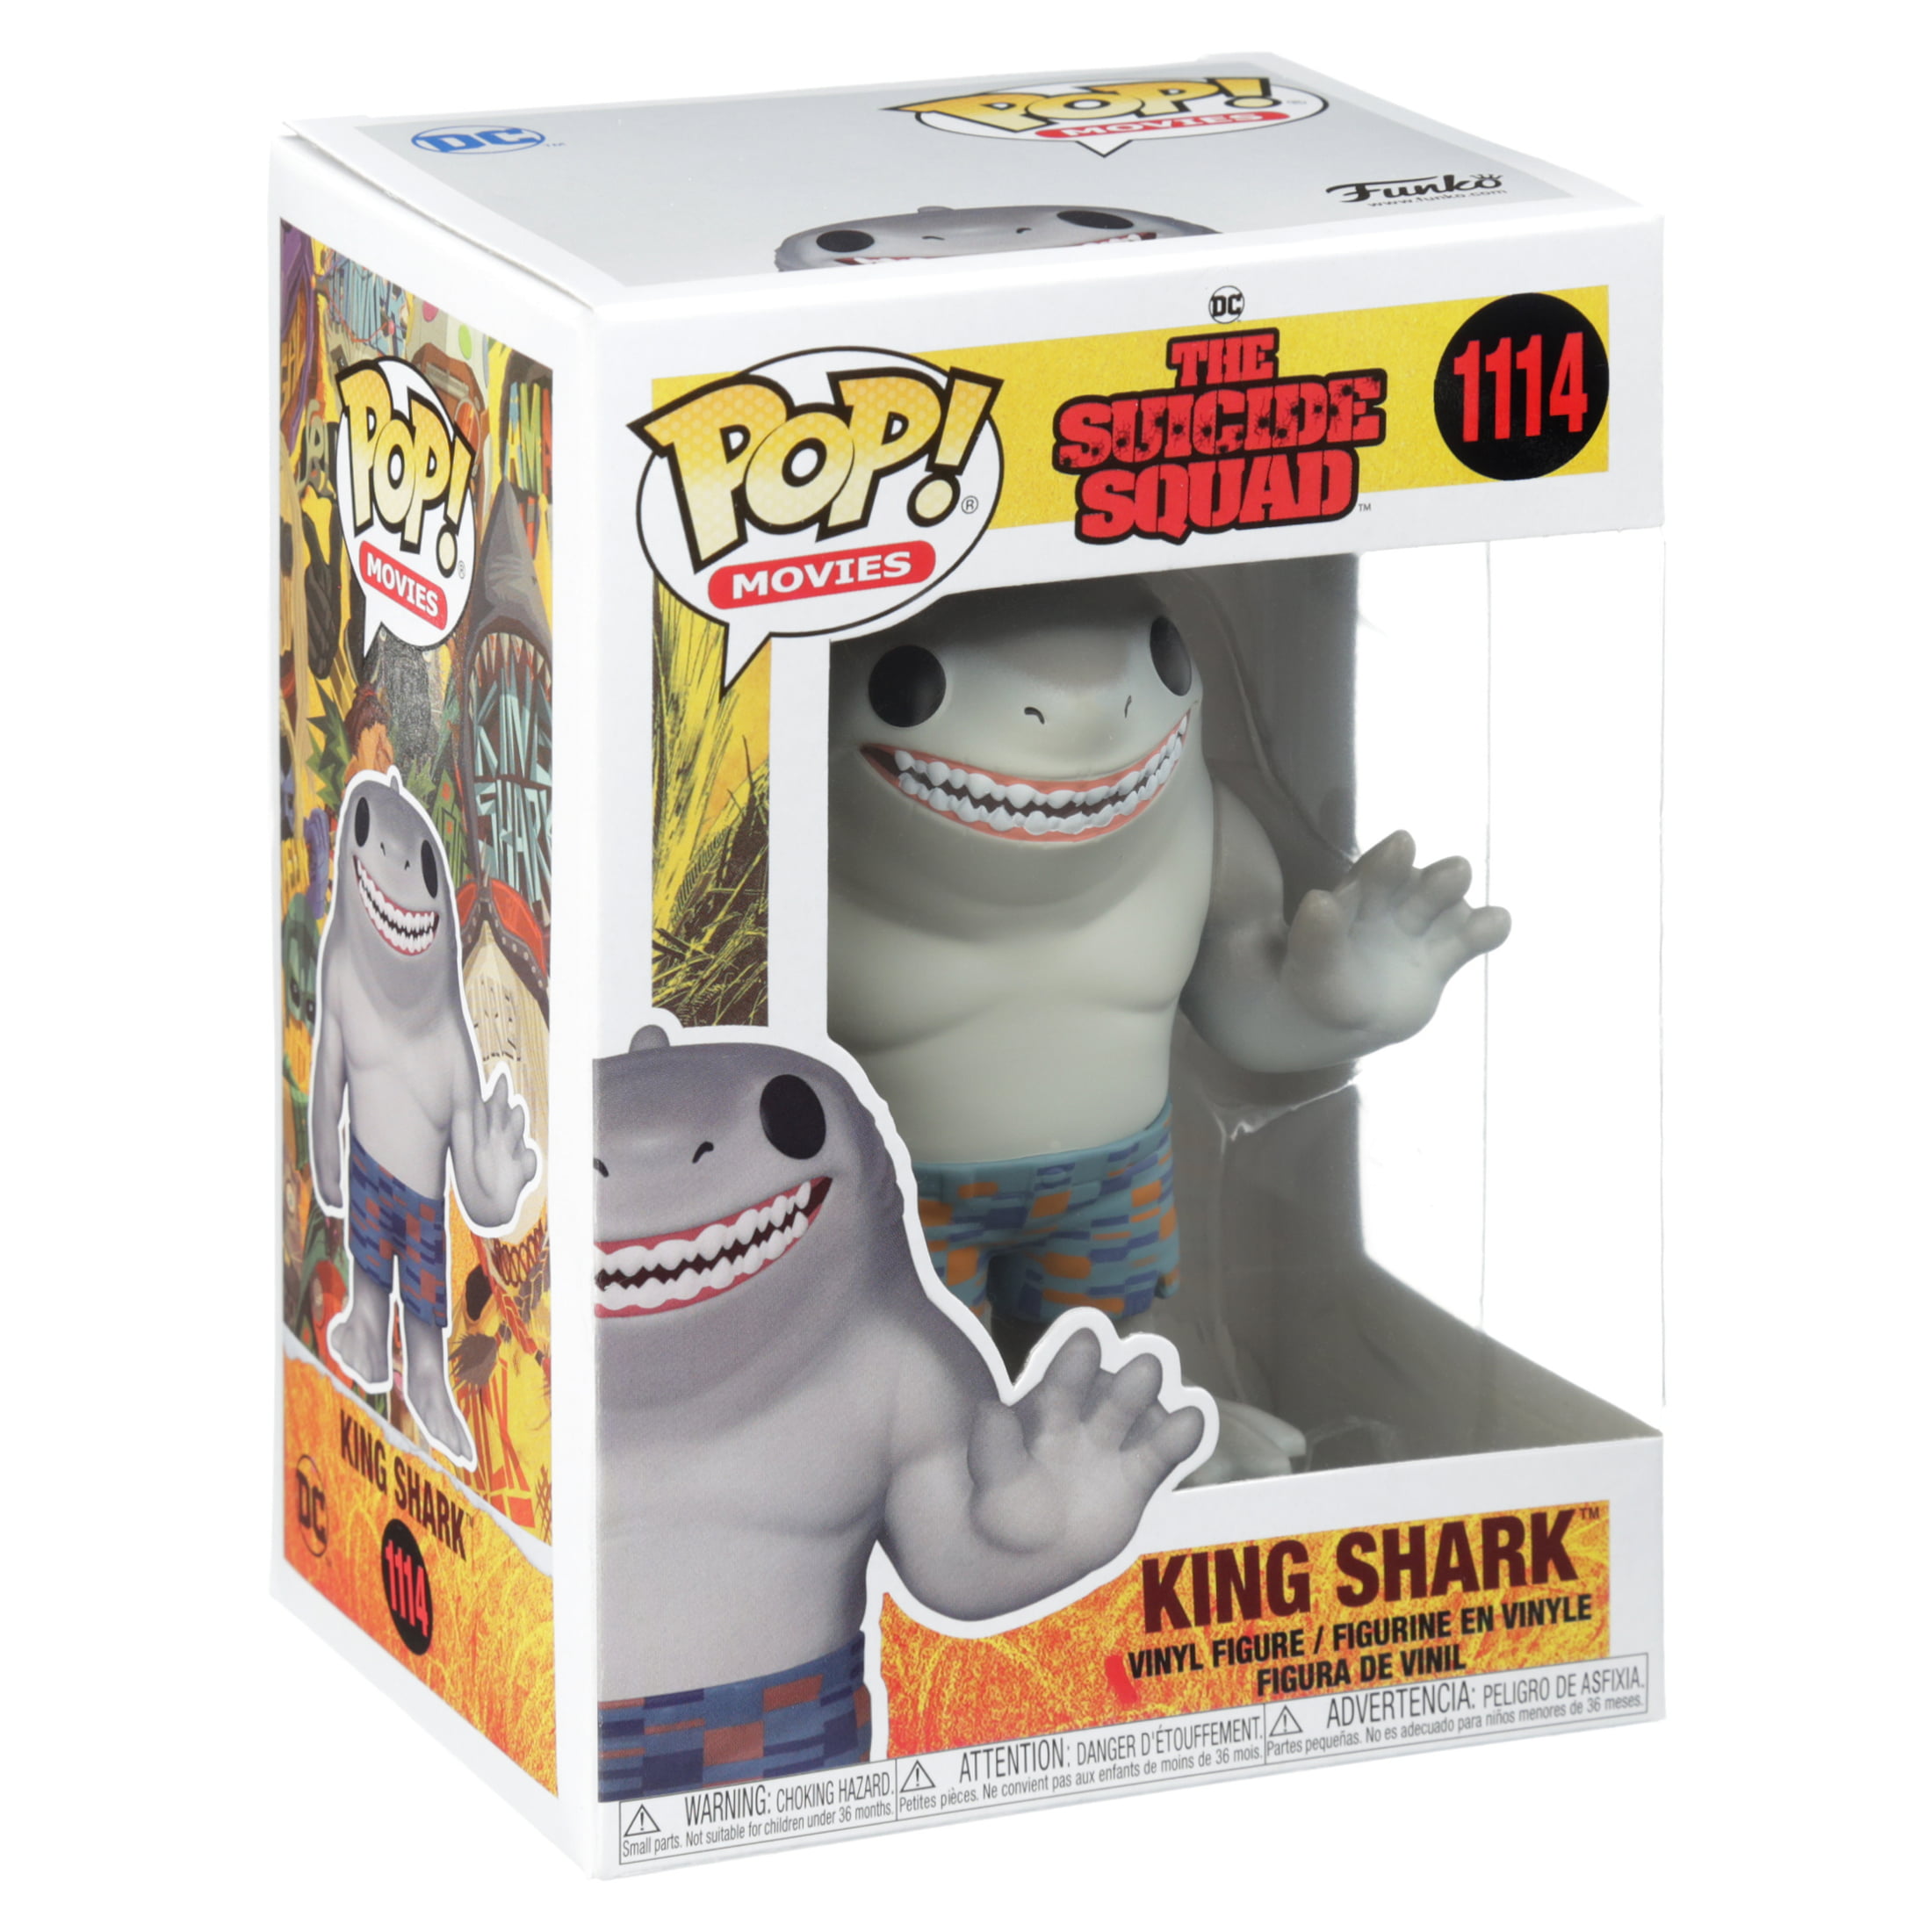 Funko Pop Movies The Suicide Squad King Shark 